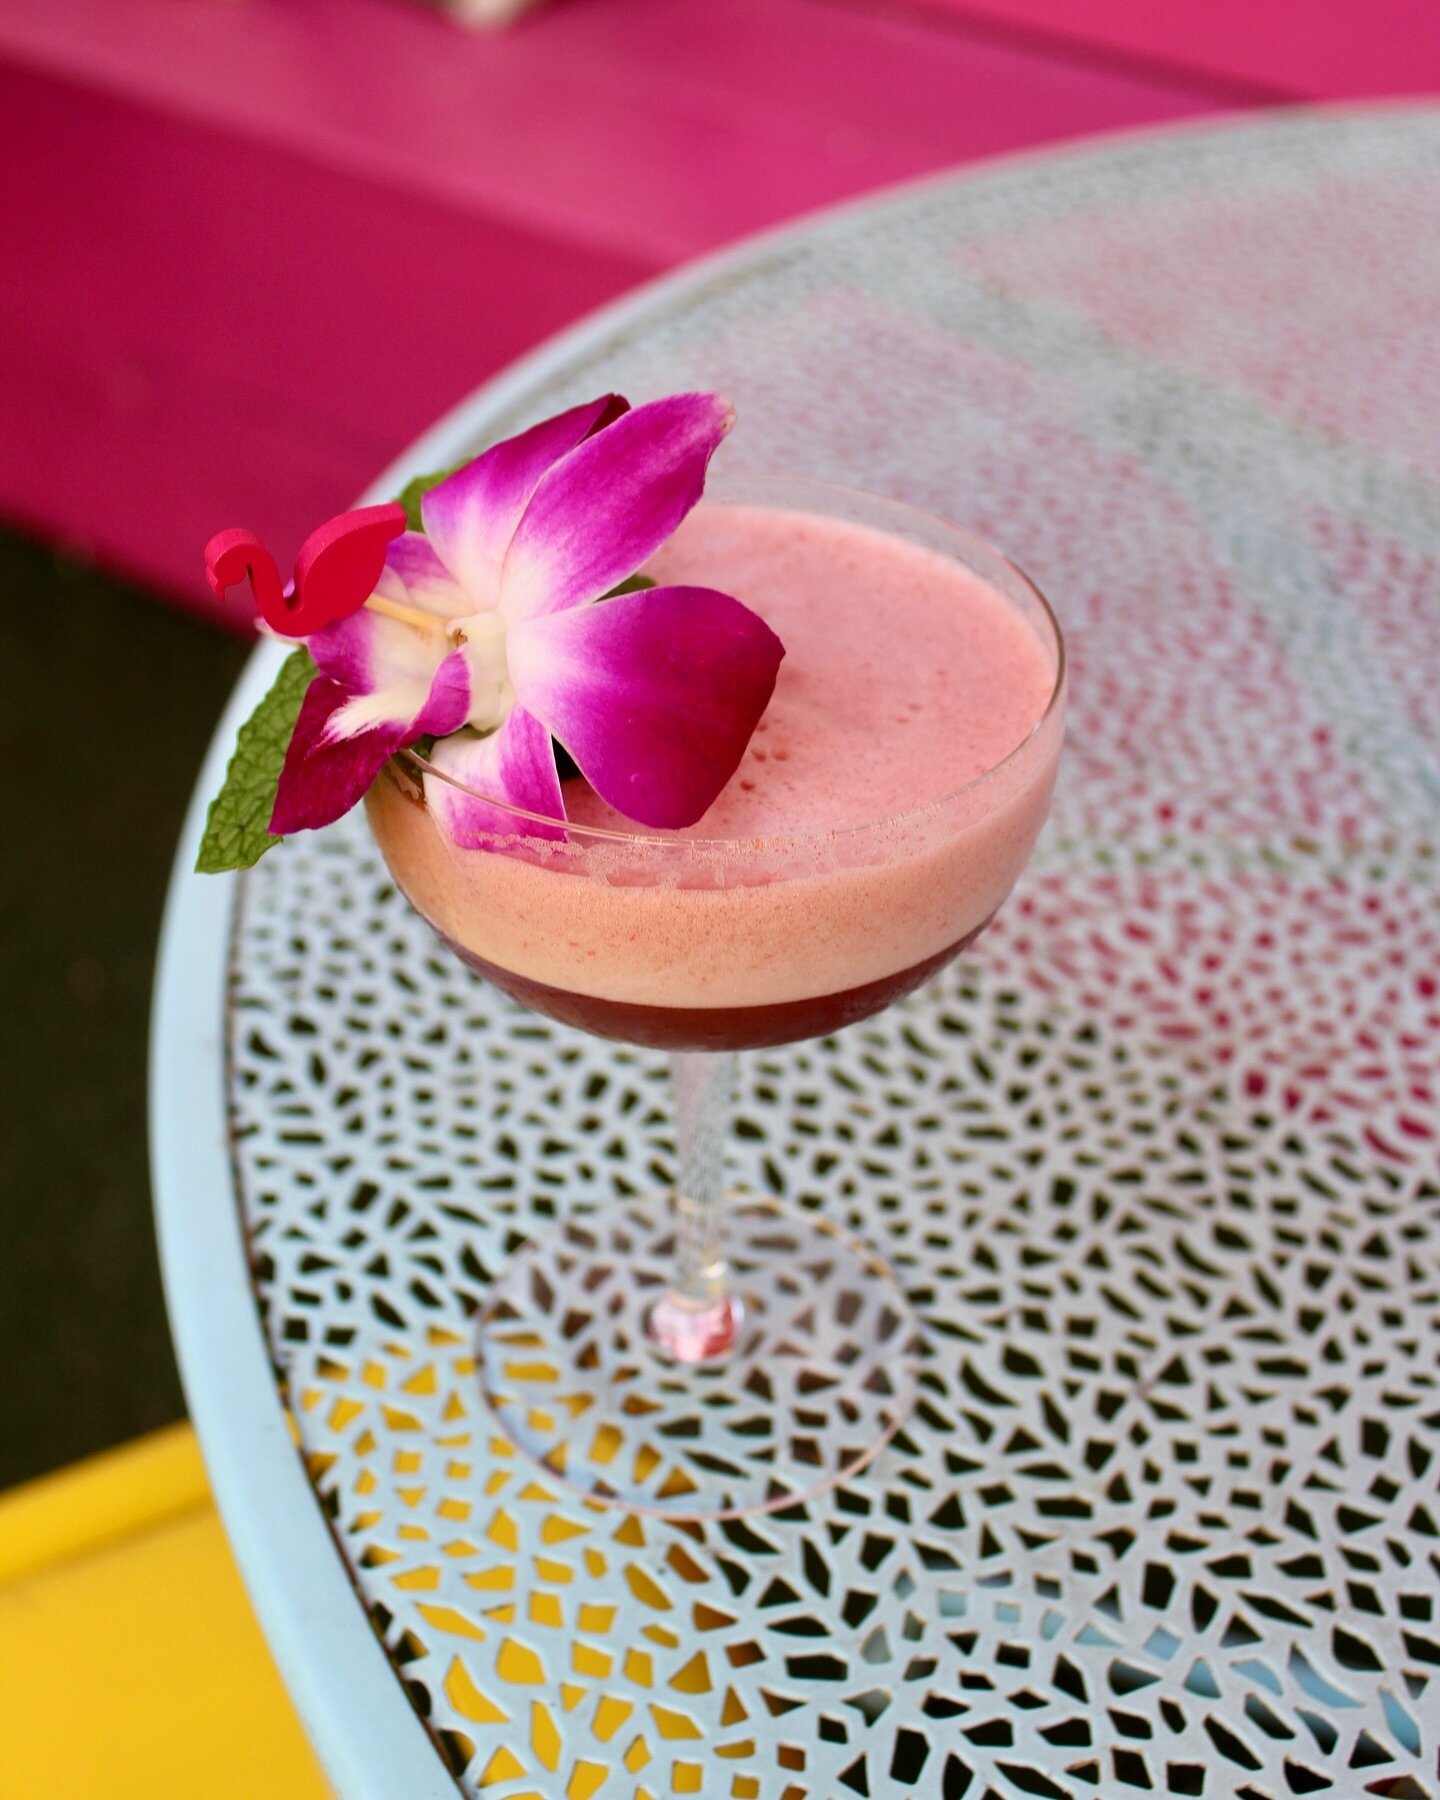 Our &lsquo;She&rsquo;s Pretty&rsquo; Mocktail is a beautiful mix of strawberry, blackberry watermelon shrub, lemon, egg white, and rose flower water 🌺✨ Add a shot of your choice to any mocktail on our menu for an added kick 🦩🌴

#novacancystpete #e